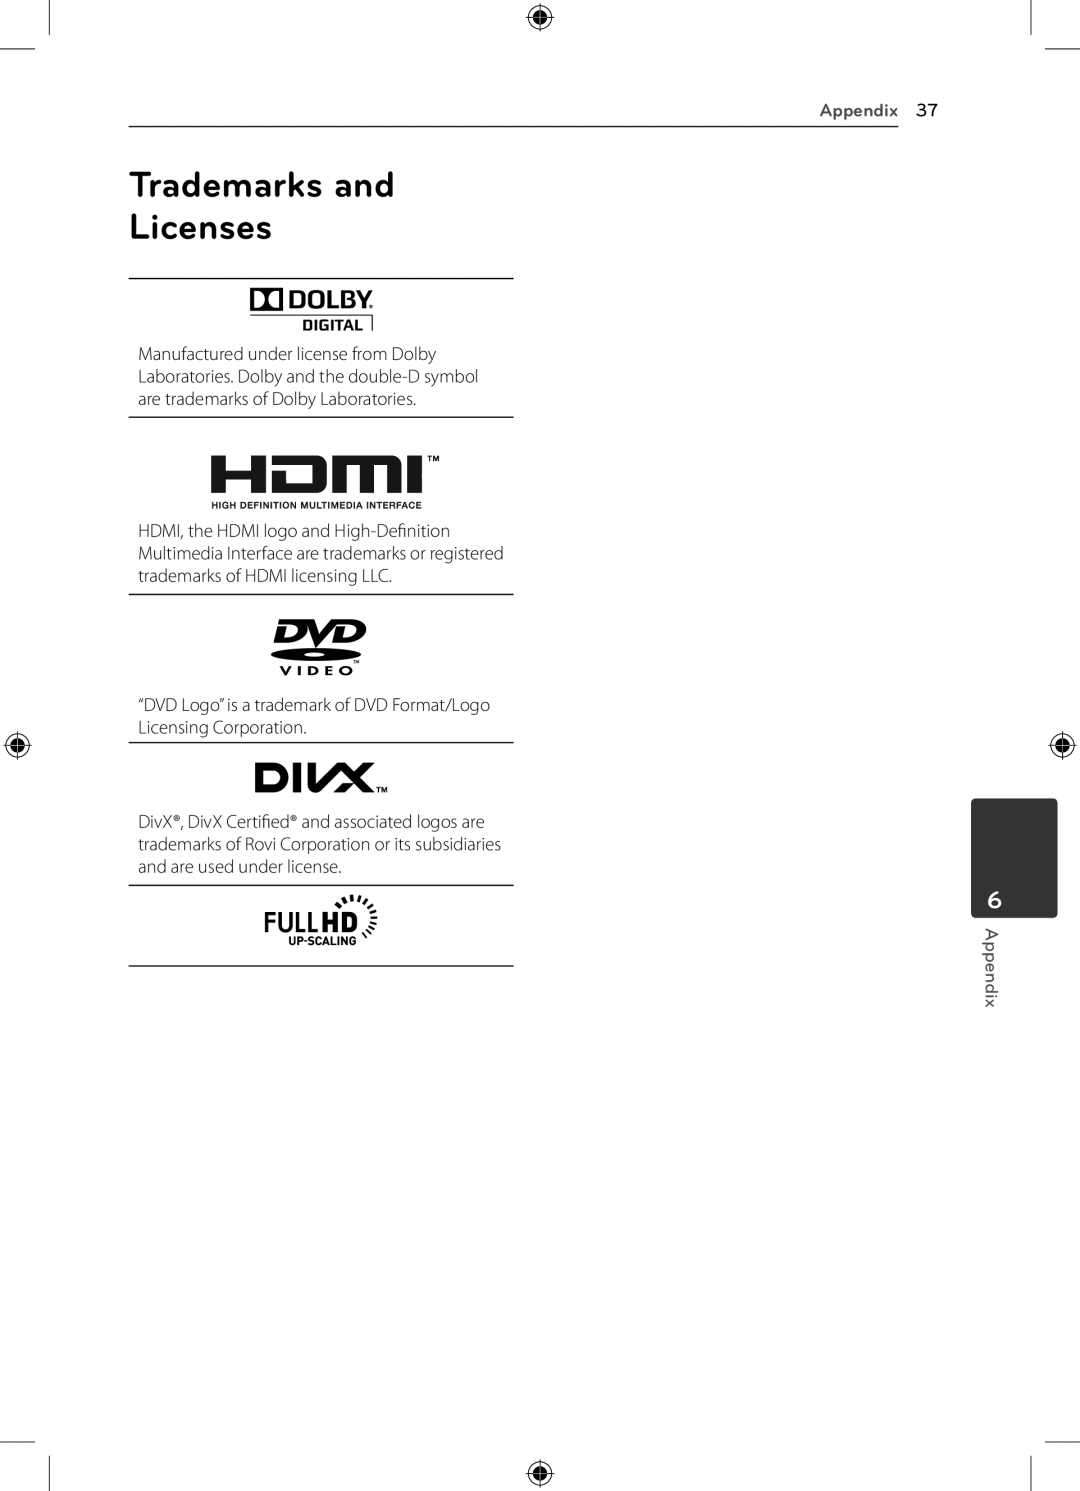 LG Electronics DH4220S Trademarks and Licenses, “DVD Logo” is a trademark of DVD Format/Logo Licensing Corporation 